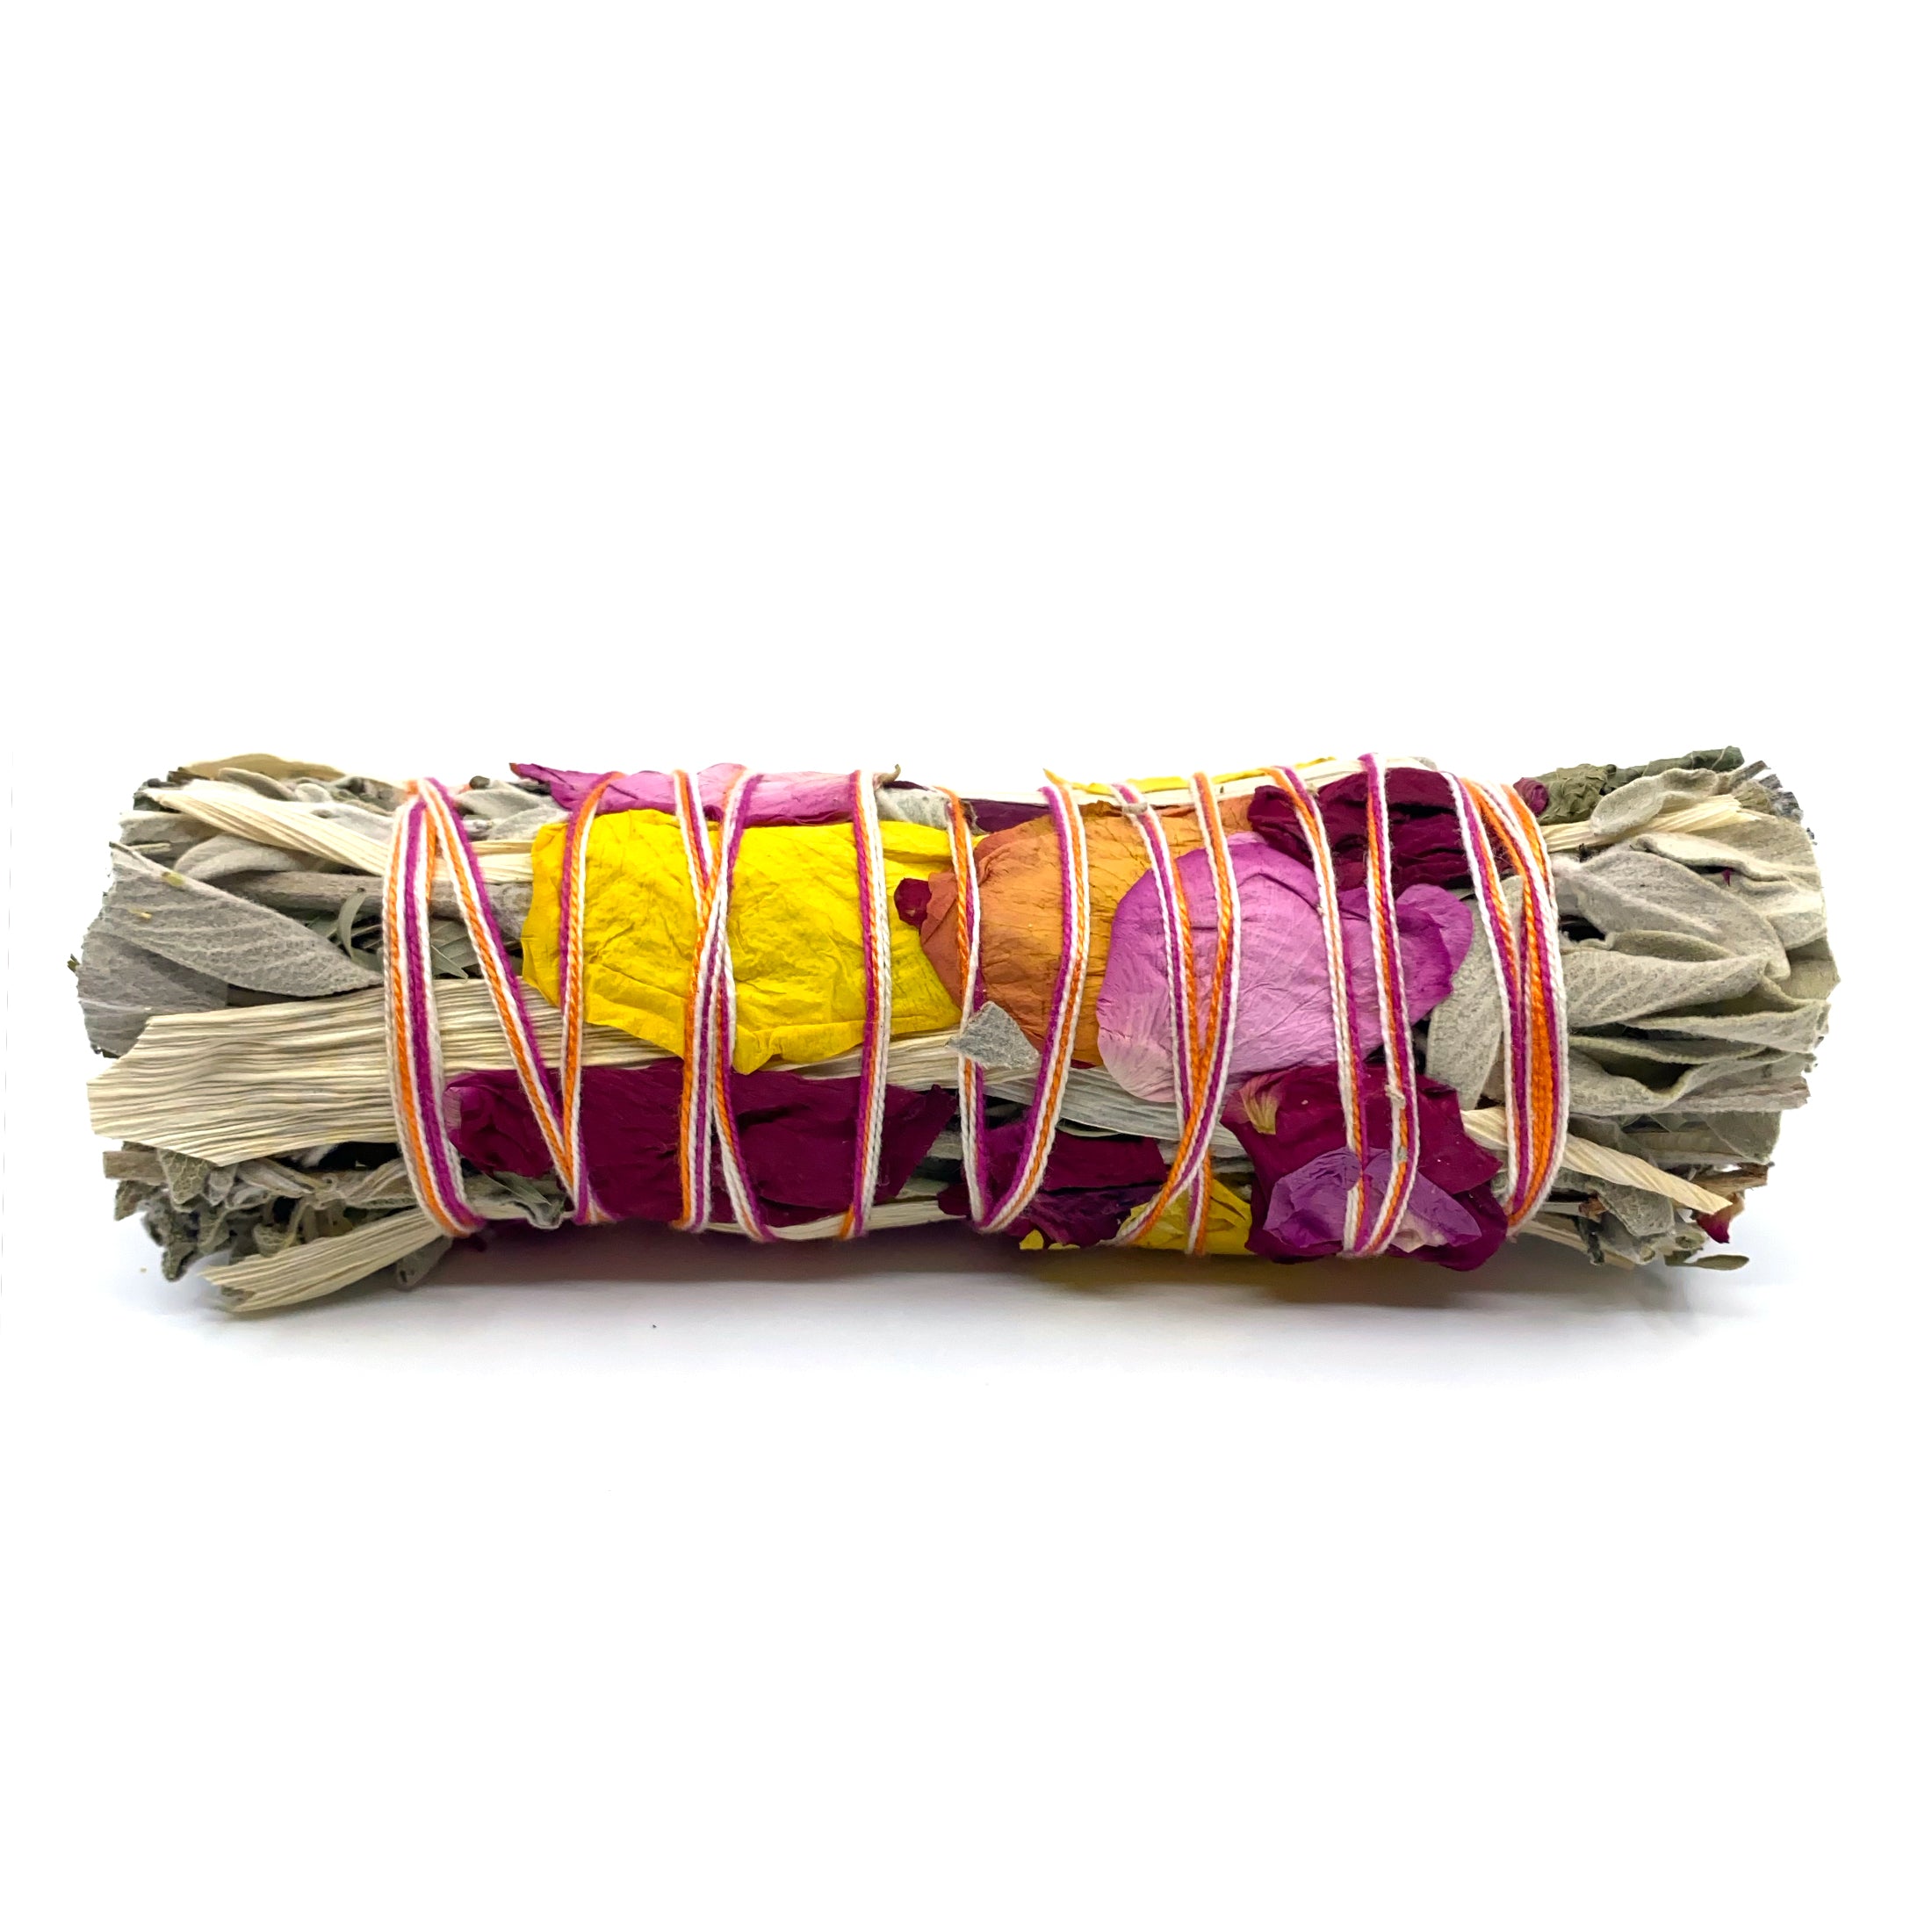 Peace & Harmony at Home - With Good Intentions Smudge Stick